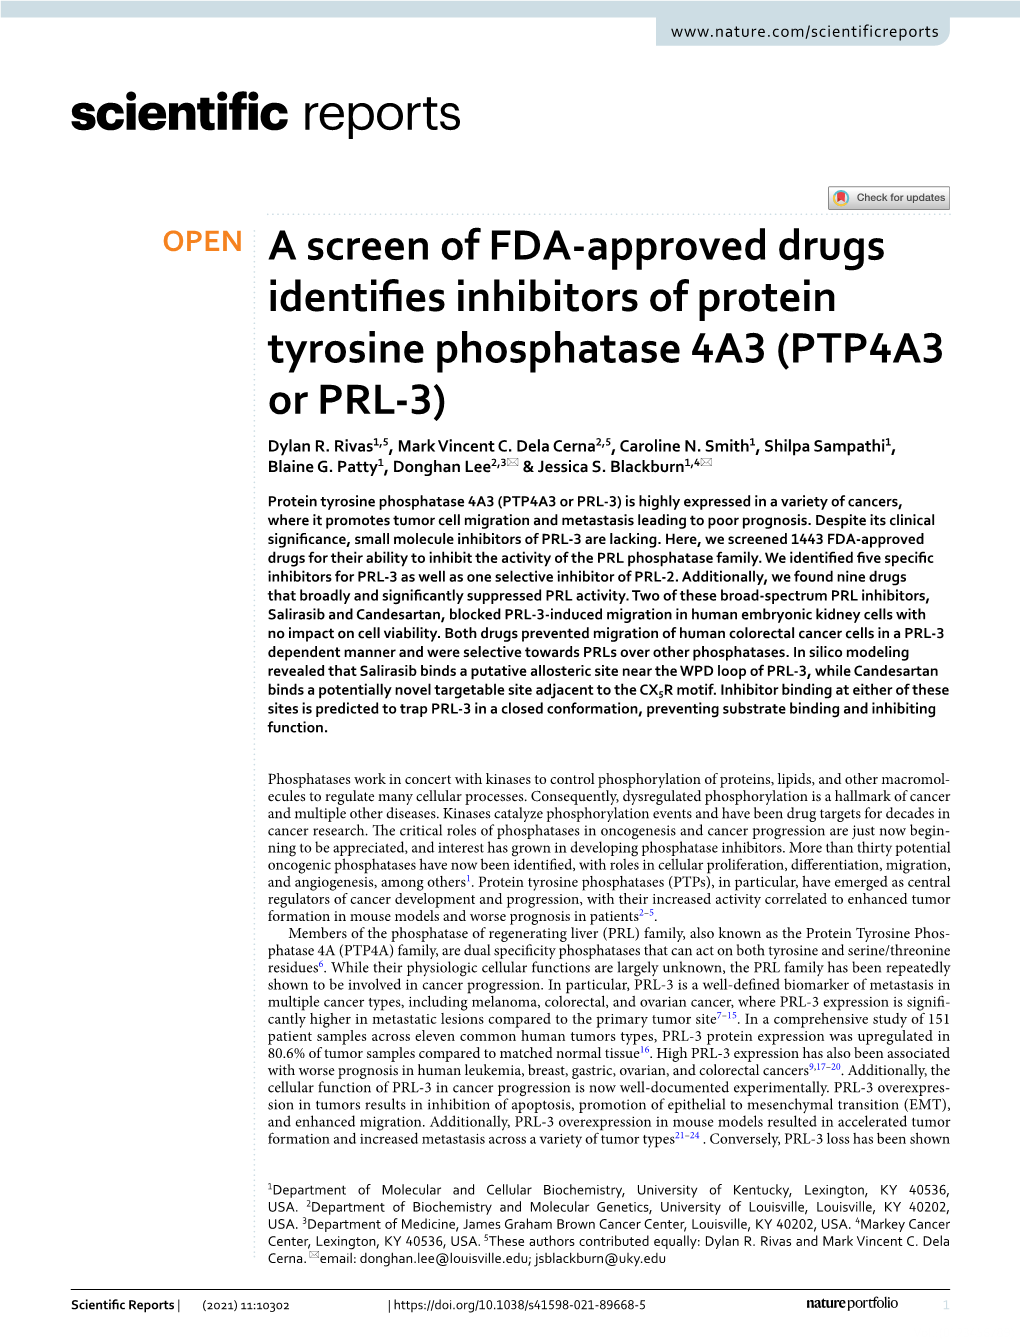 A Screen of FDA-Approved Drugs Identifies Inhibitors of Protein